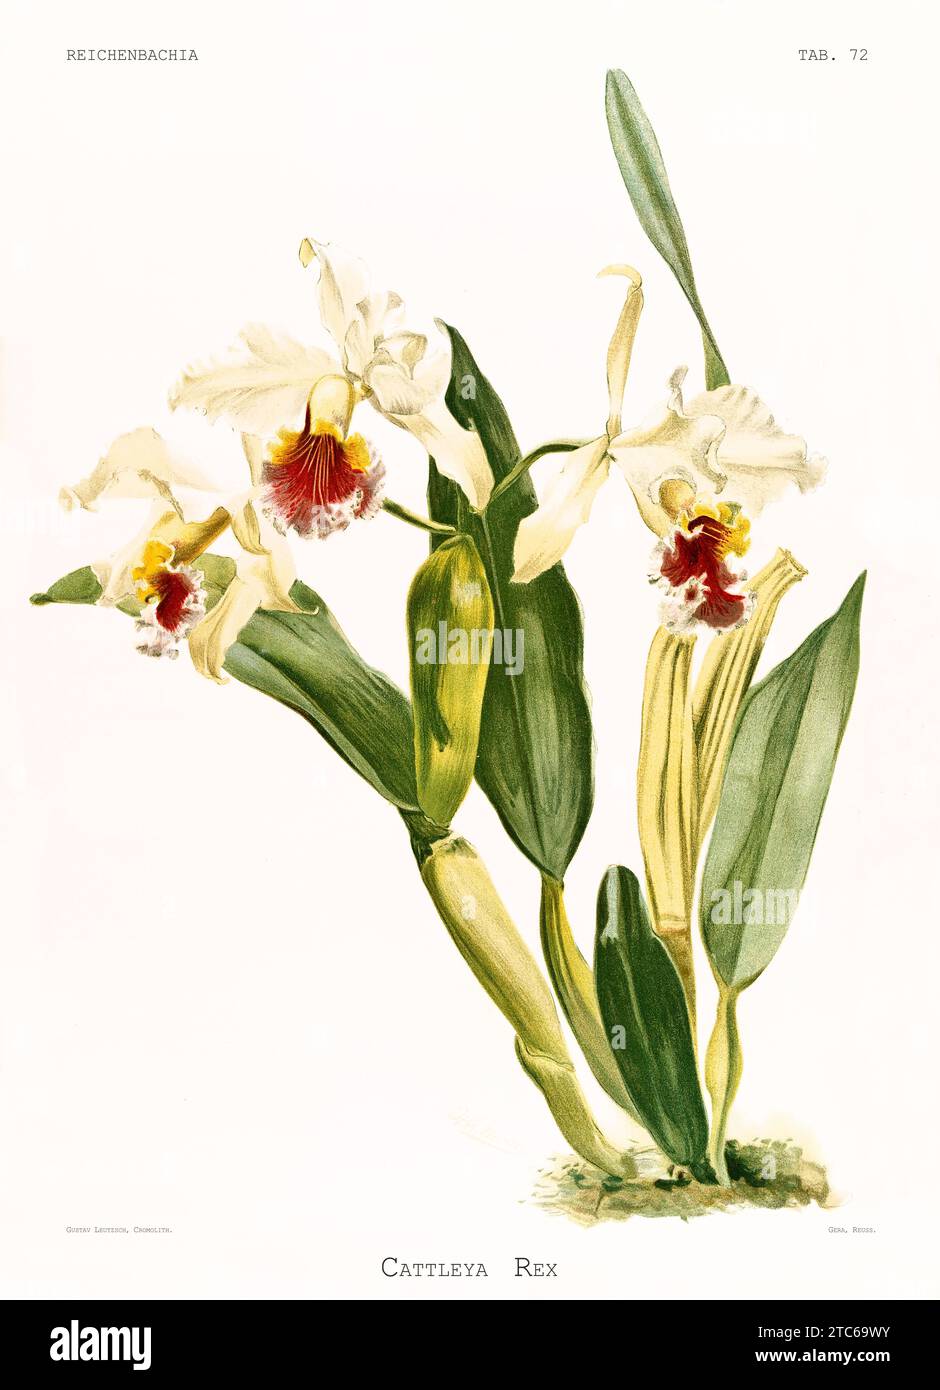 Old illustration of  King of the Cattleyas (Cattleya rex). Reichenbachia, by F. Sander. St. Albans, UK, 1888 - 1894 Stock Photo